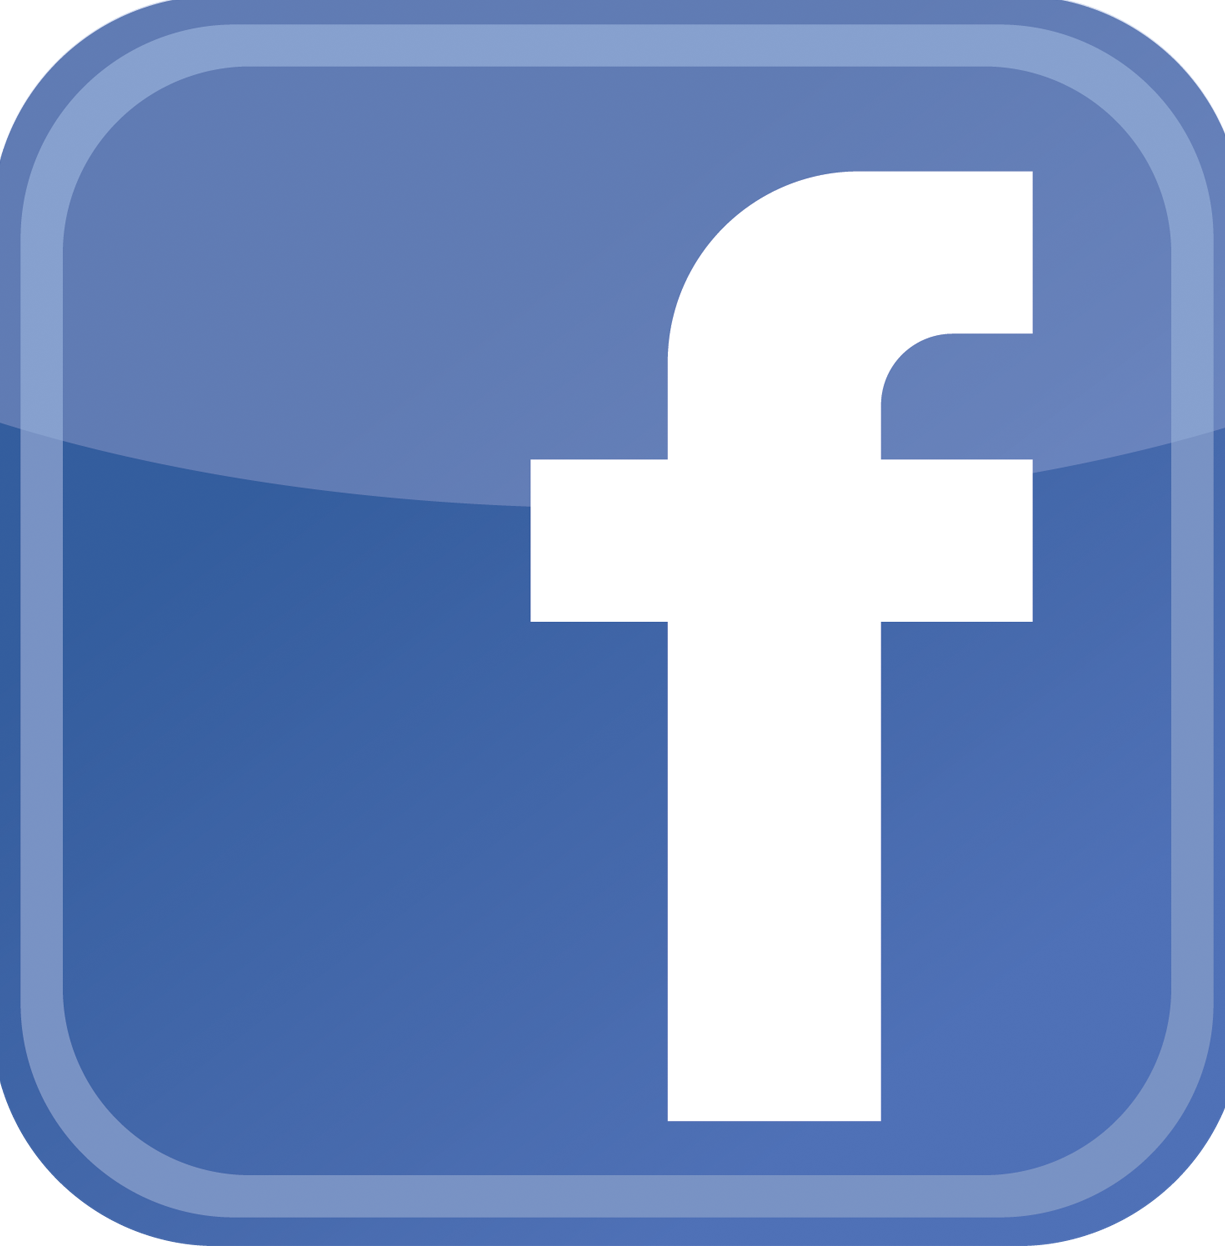 Click to Like Horserail on Facebook!